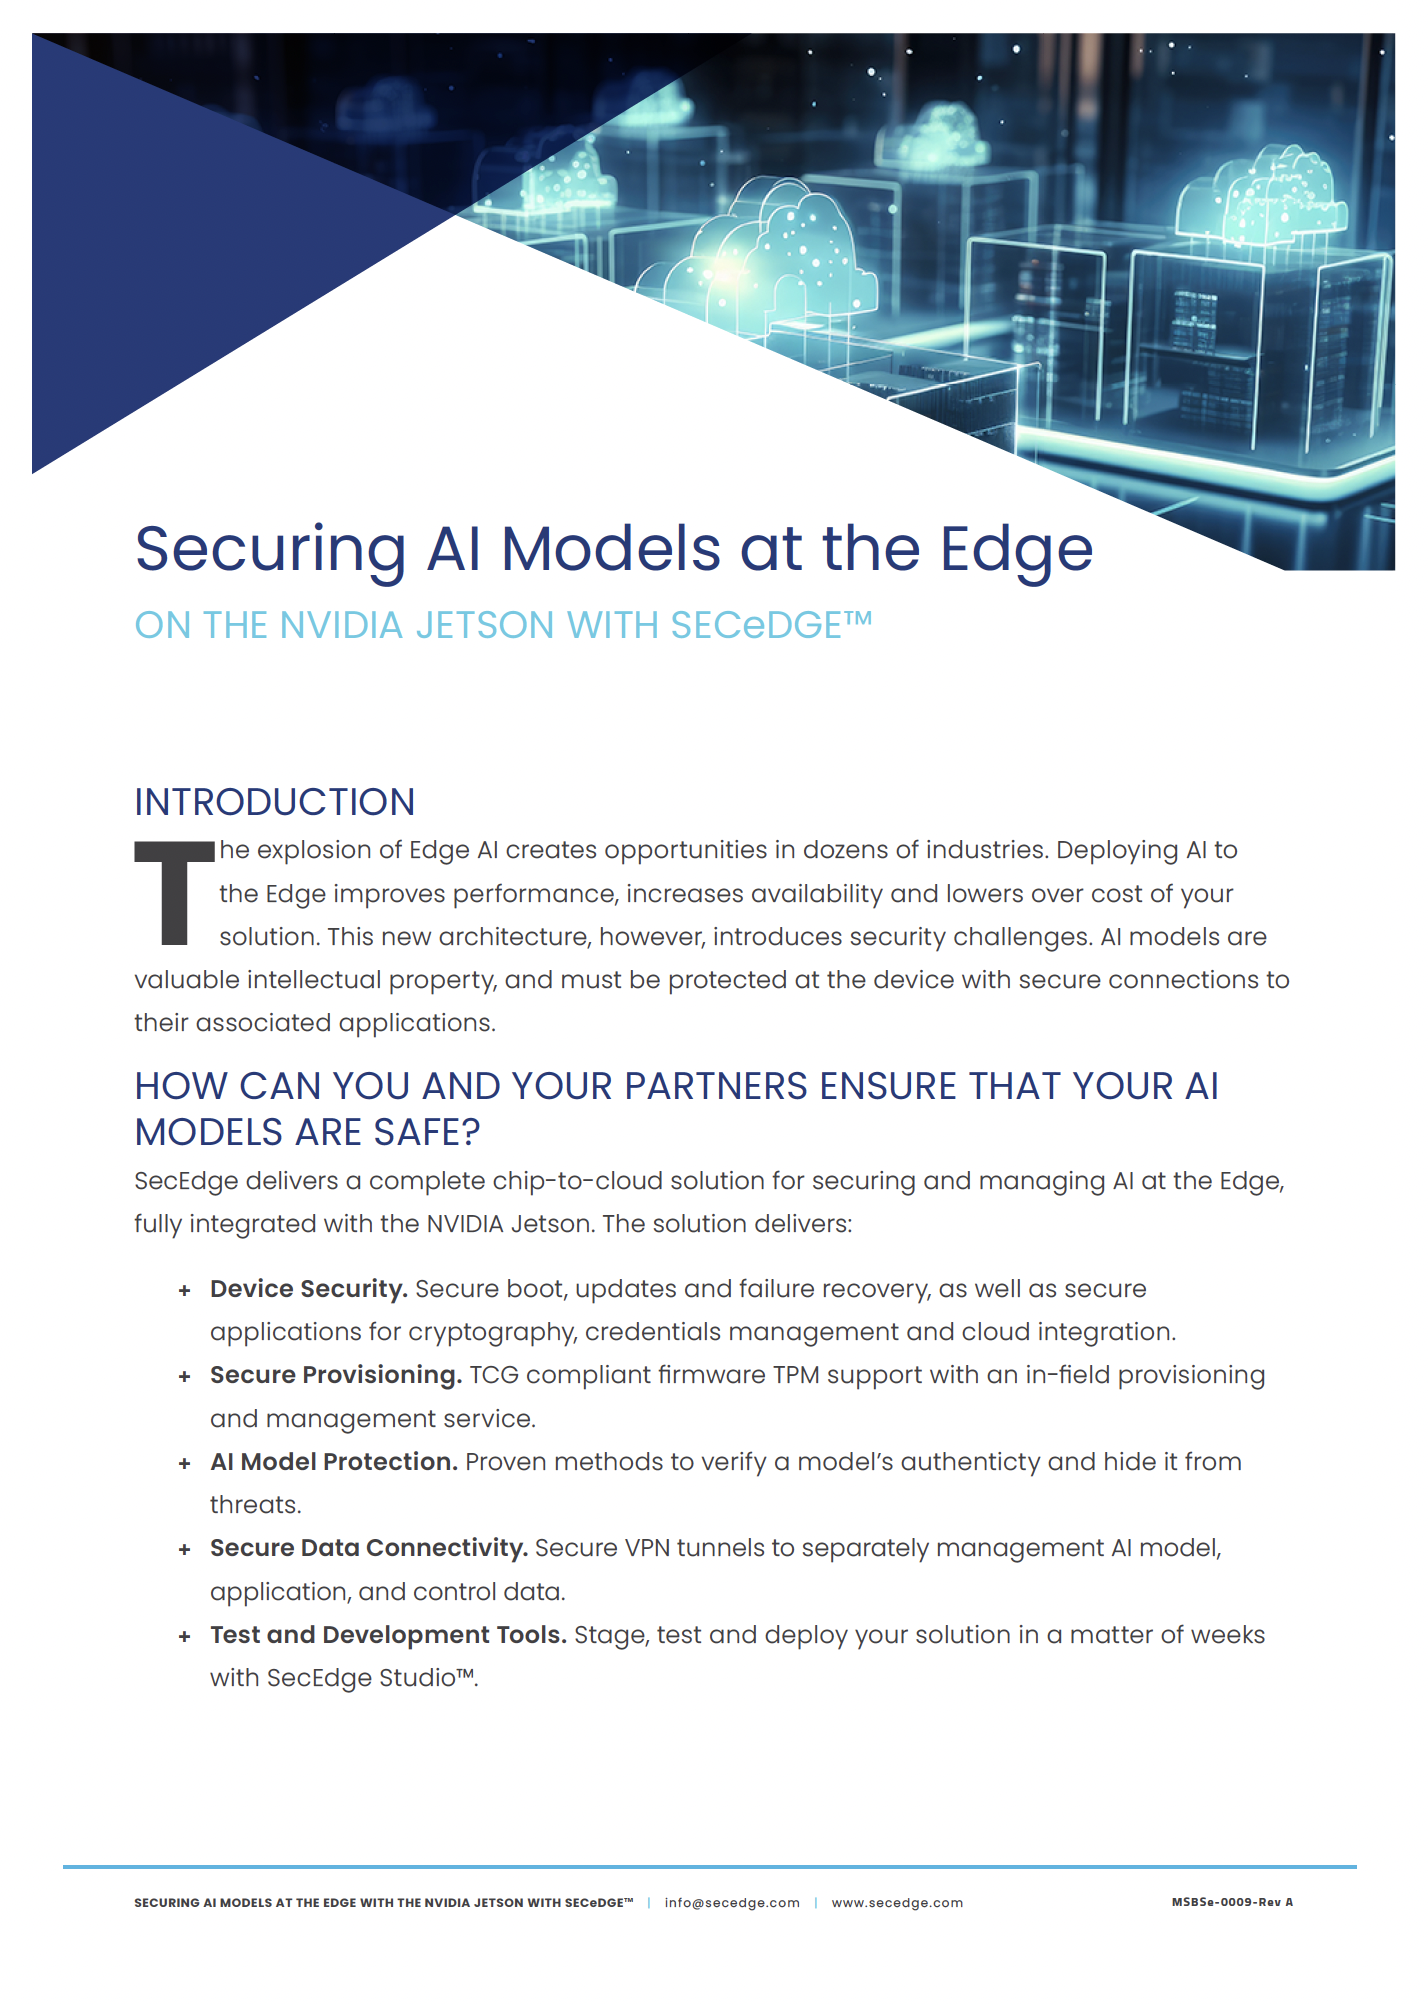 Securing AI Models at the Edge on the NVIDIA Jetson with SecEdge™